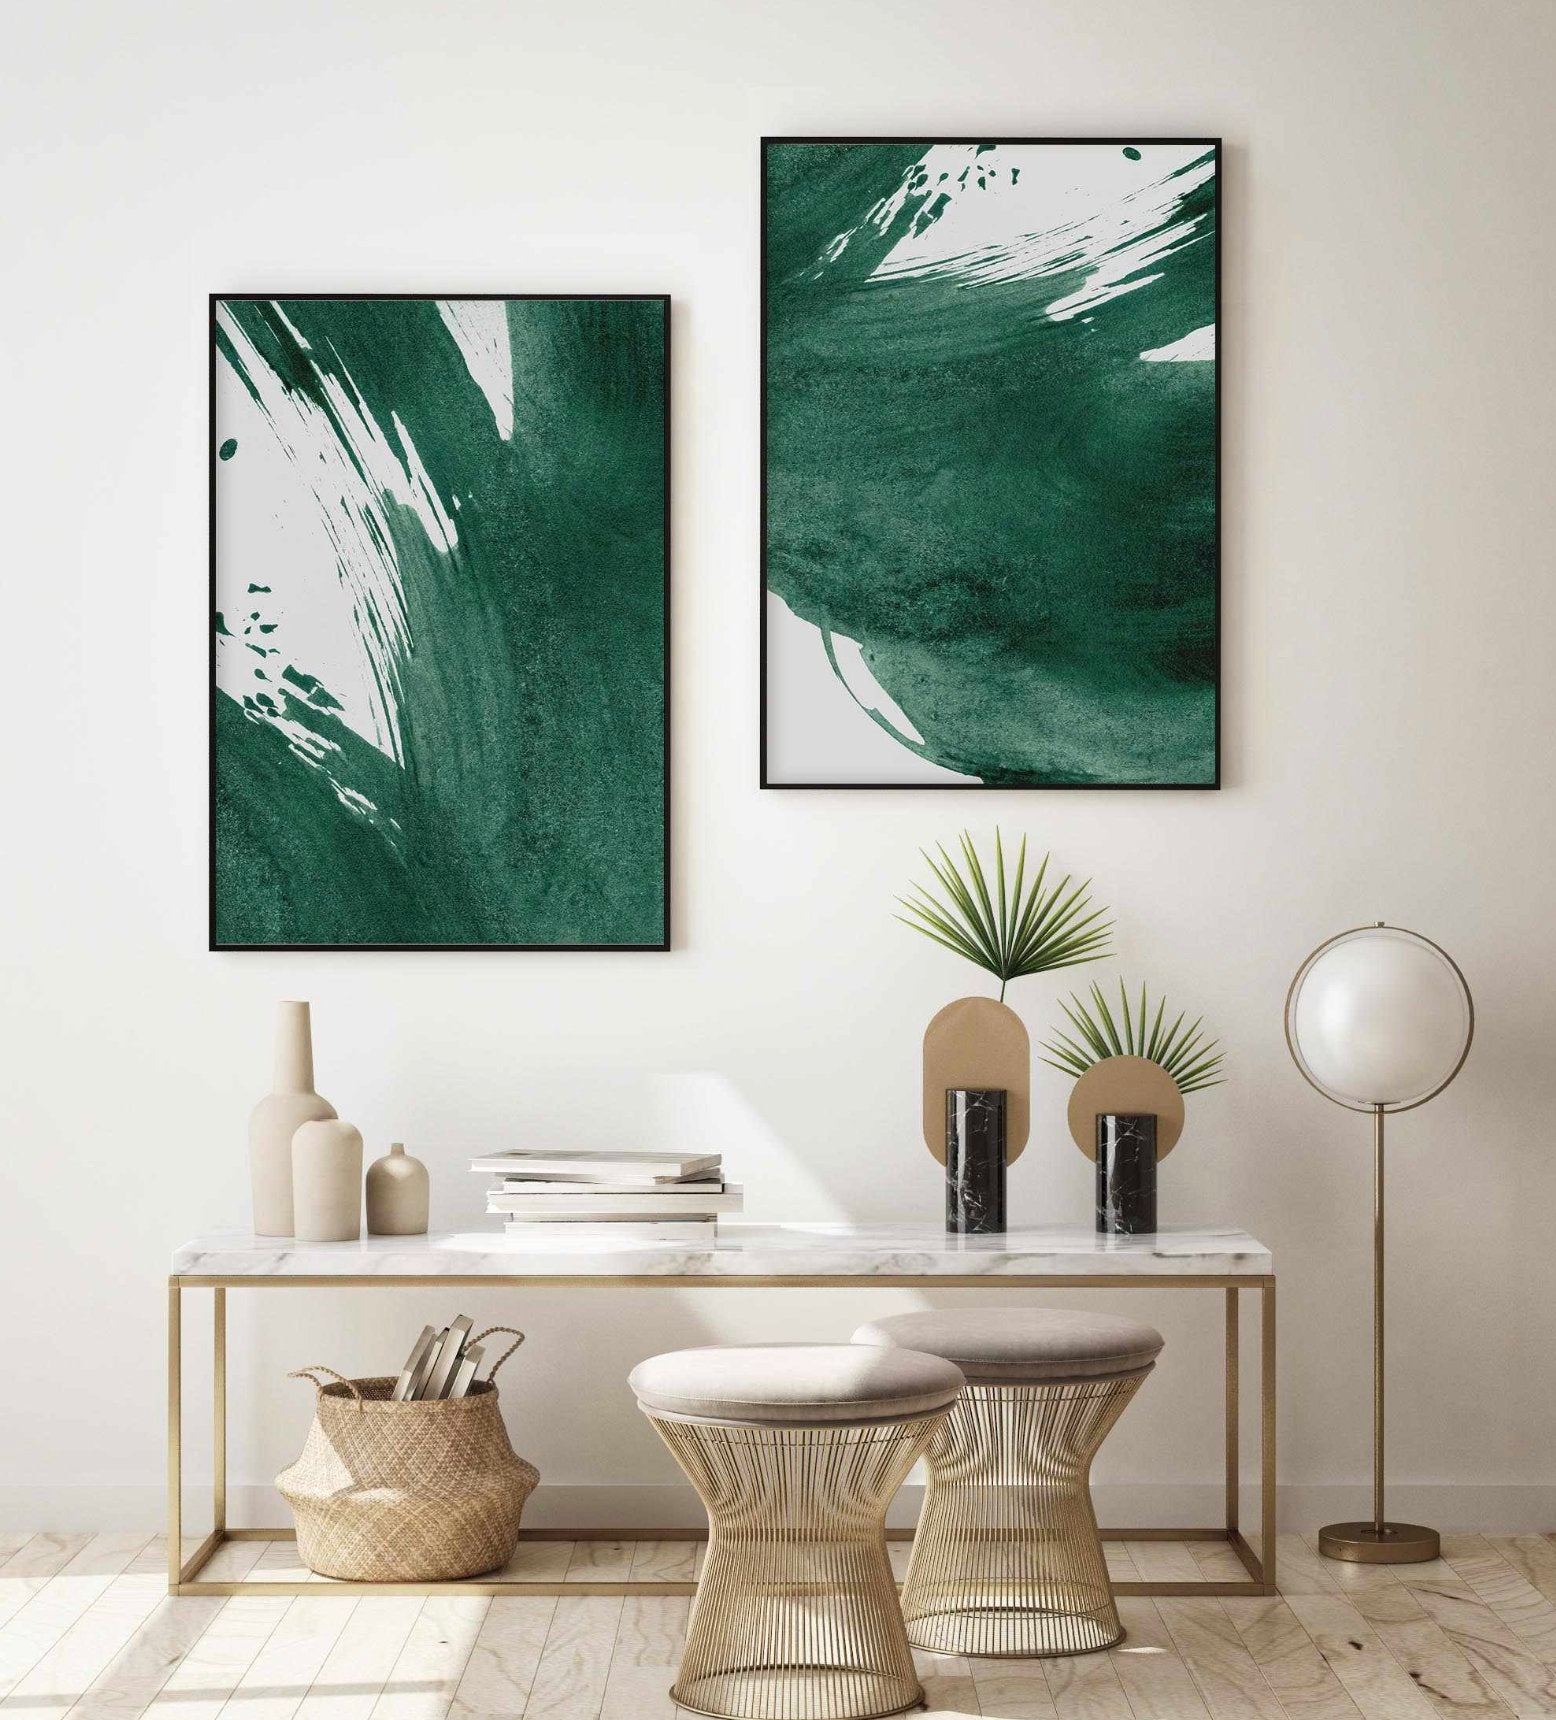 Green Forest Canvas Wall Art Living Room Decoration Big Trees Nature Picture Large Modern Canvas Artwork Contemporary Woods Mossy Rock Spring Season